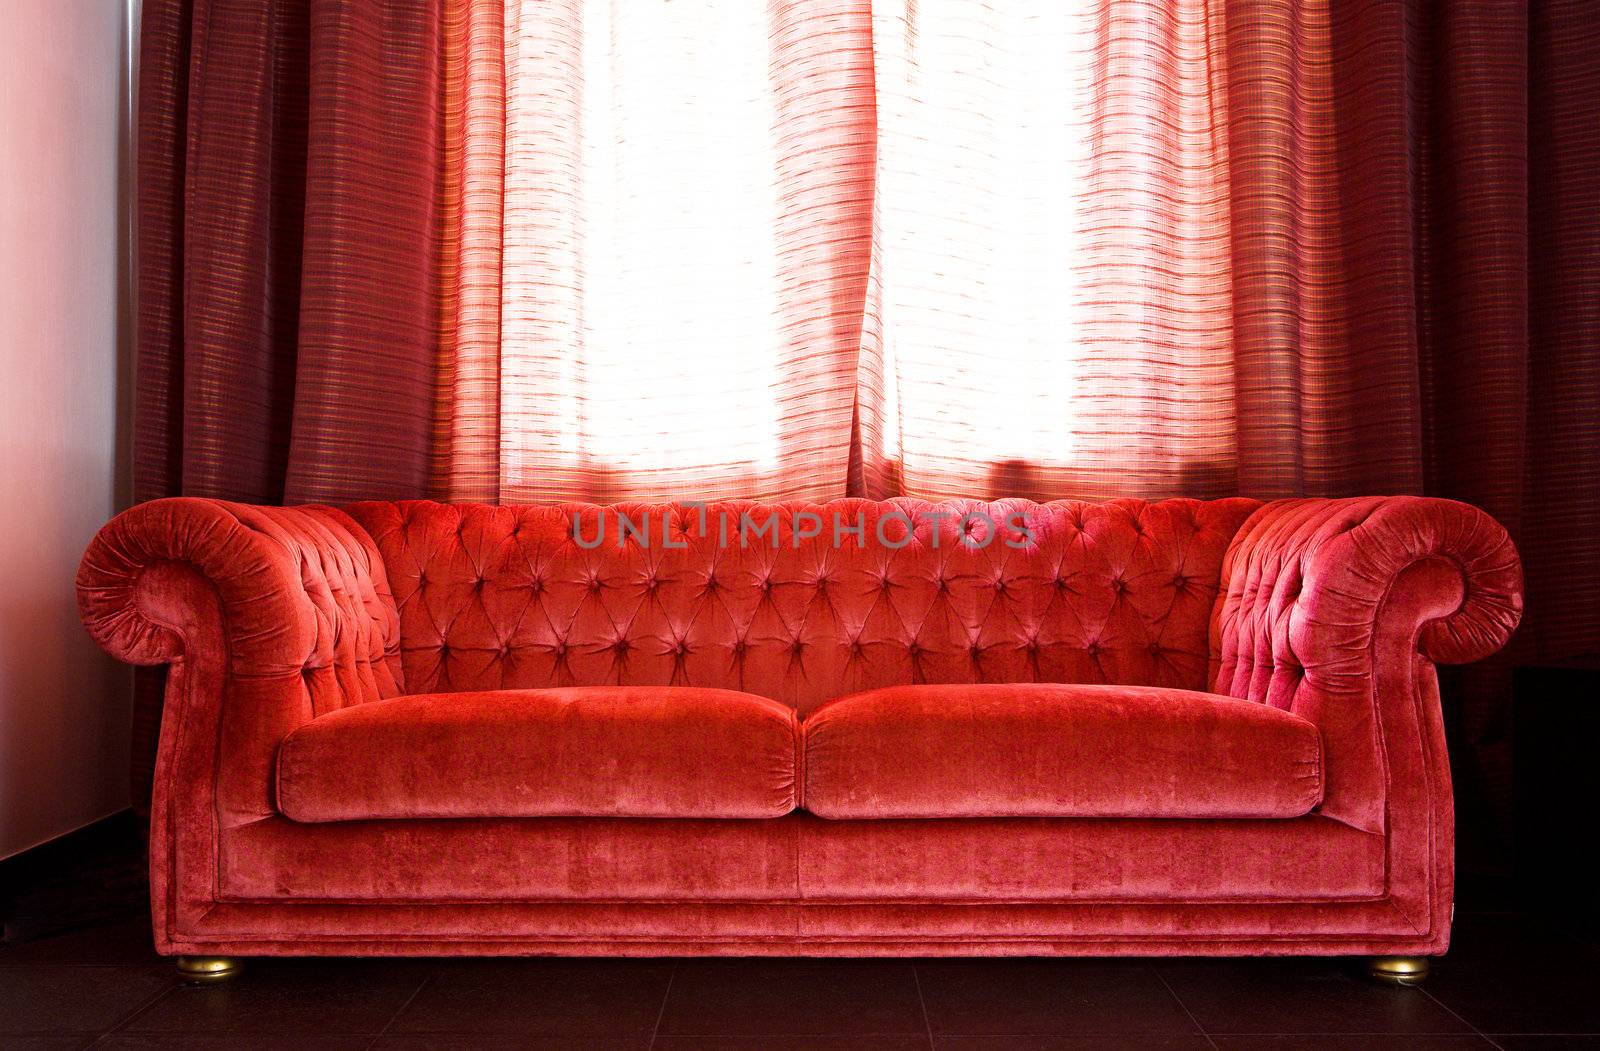 Drawing room in which there is a red sofa and a table from black marble shined with the sun through the closed curtains
